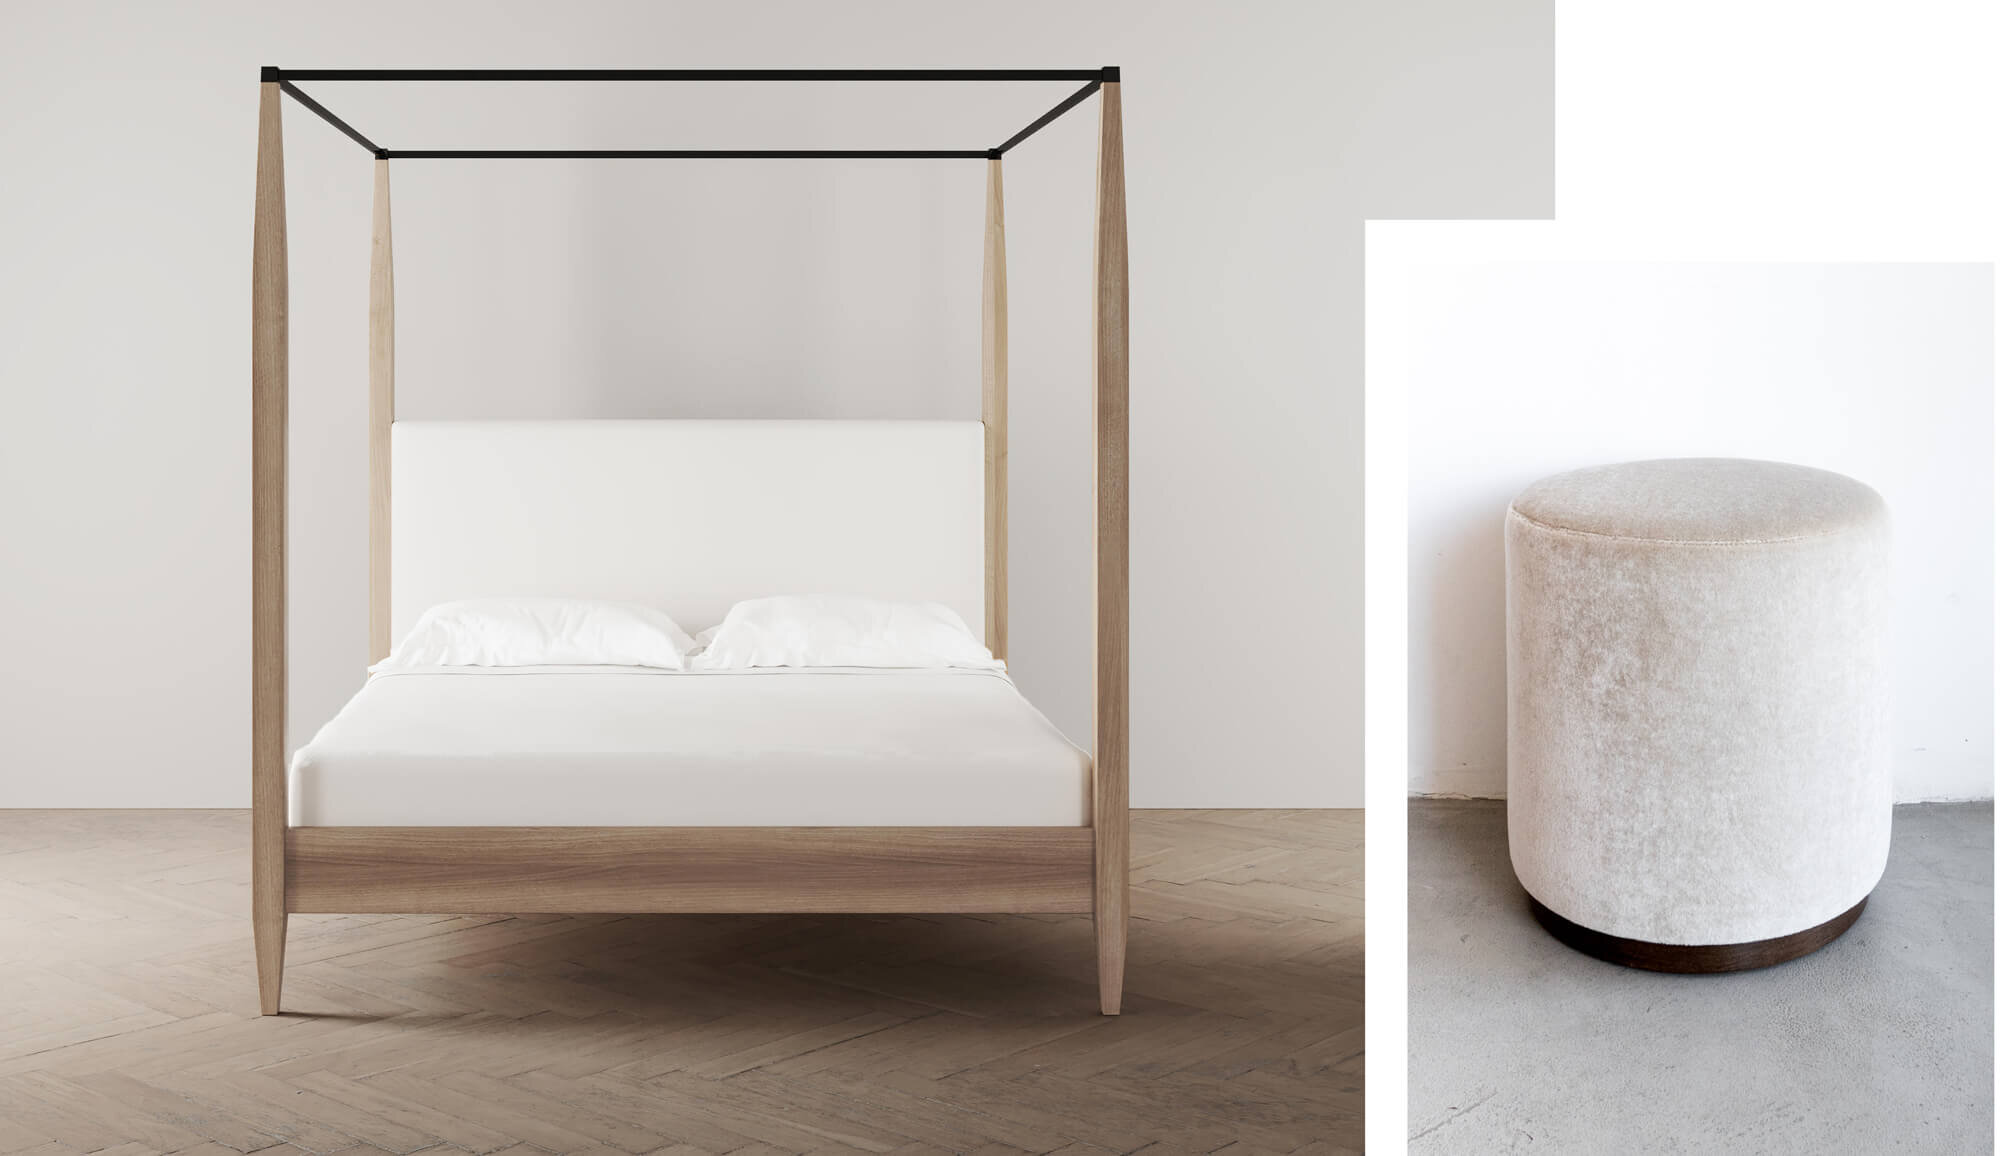 Two images, one is a four poster canopy bed and the other is a small round upholstered ottoman.